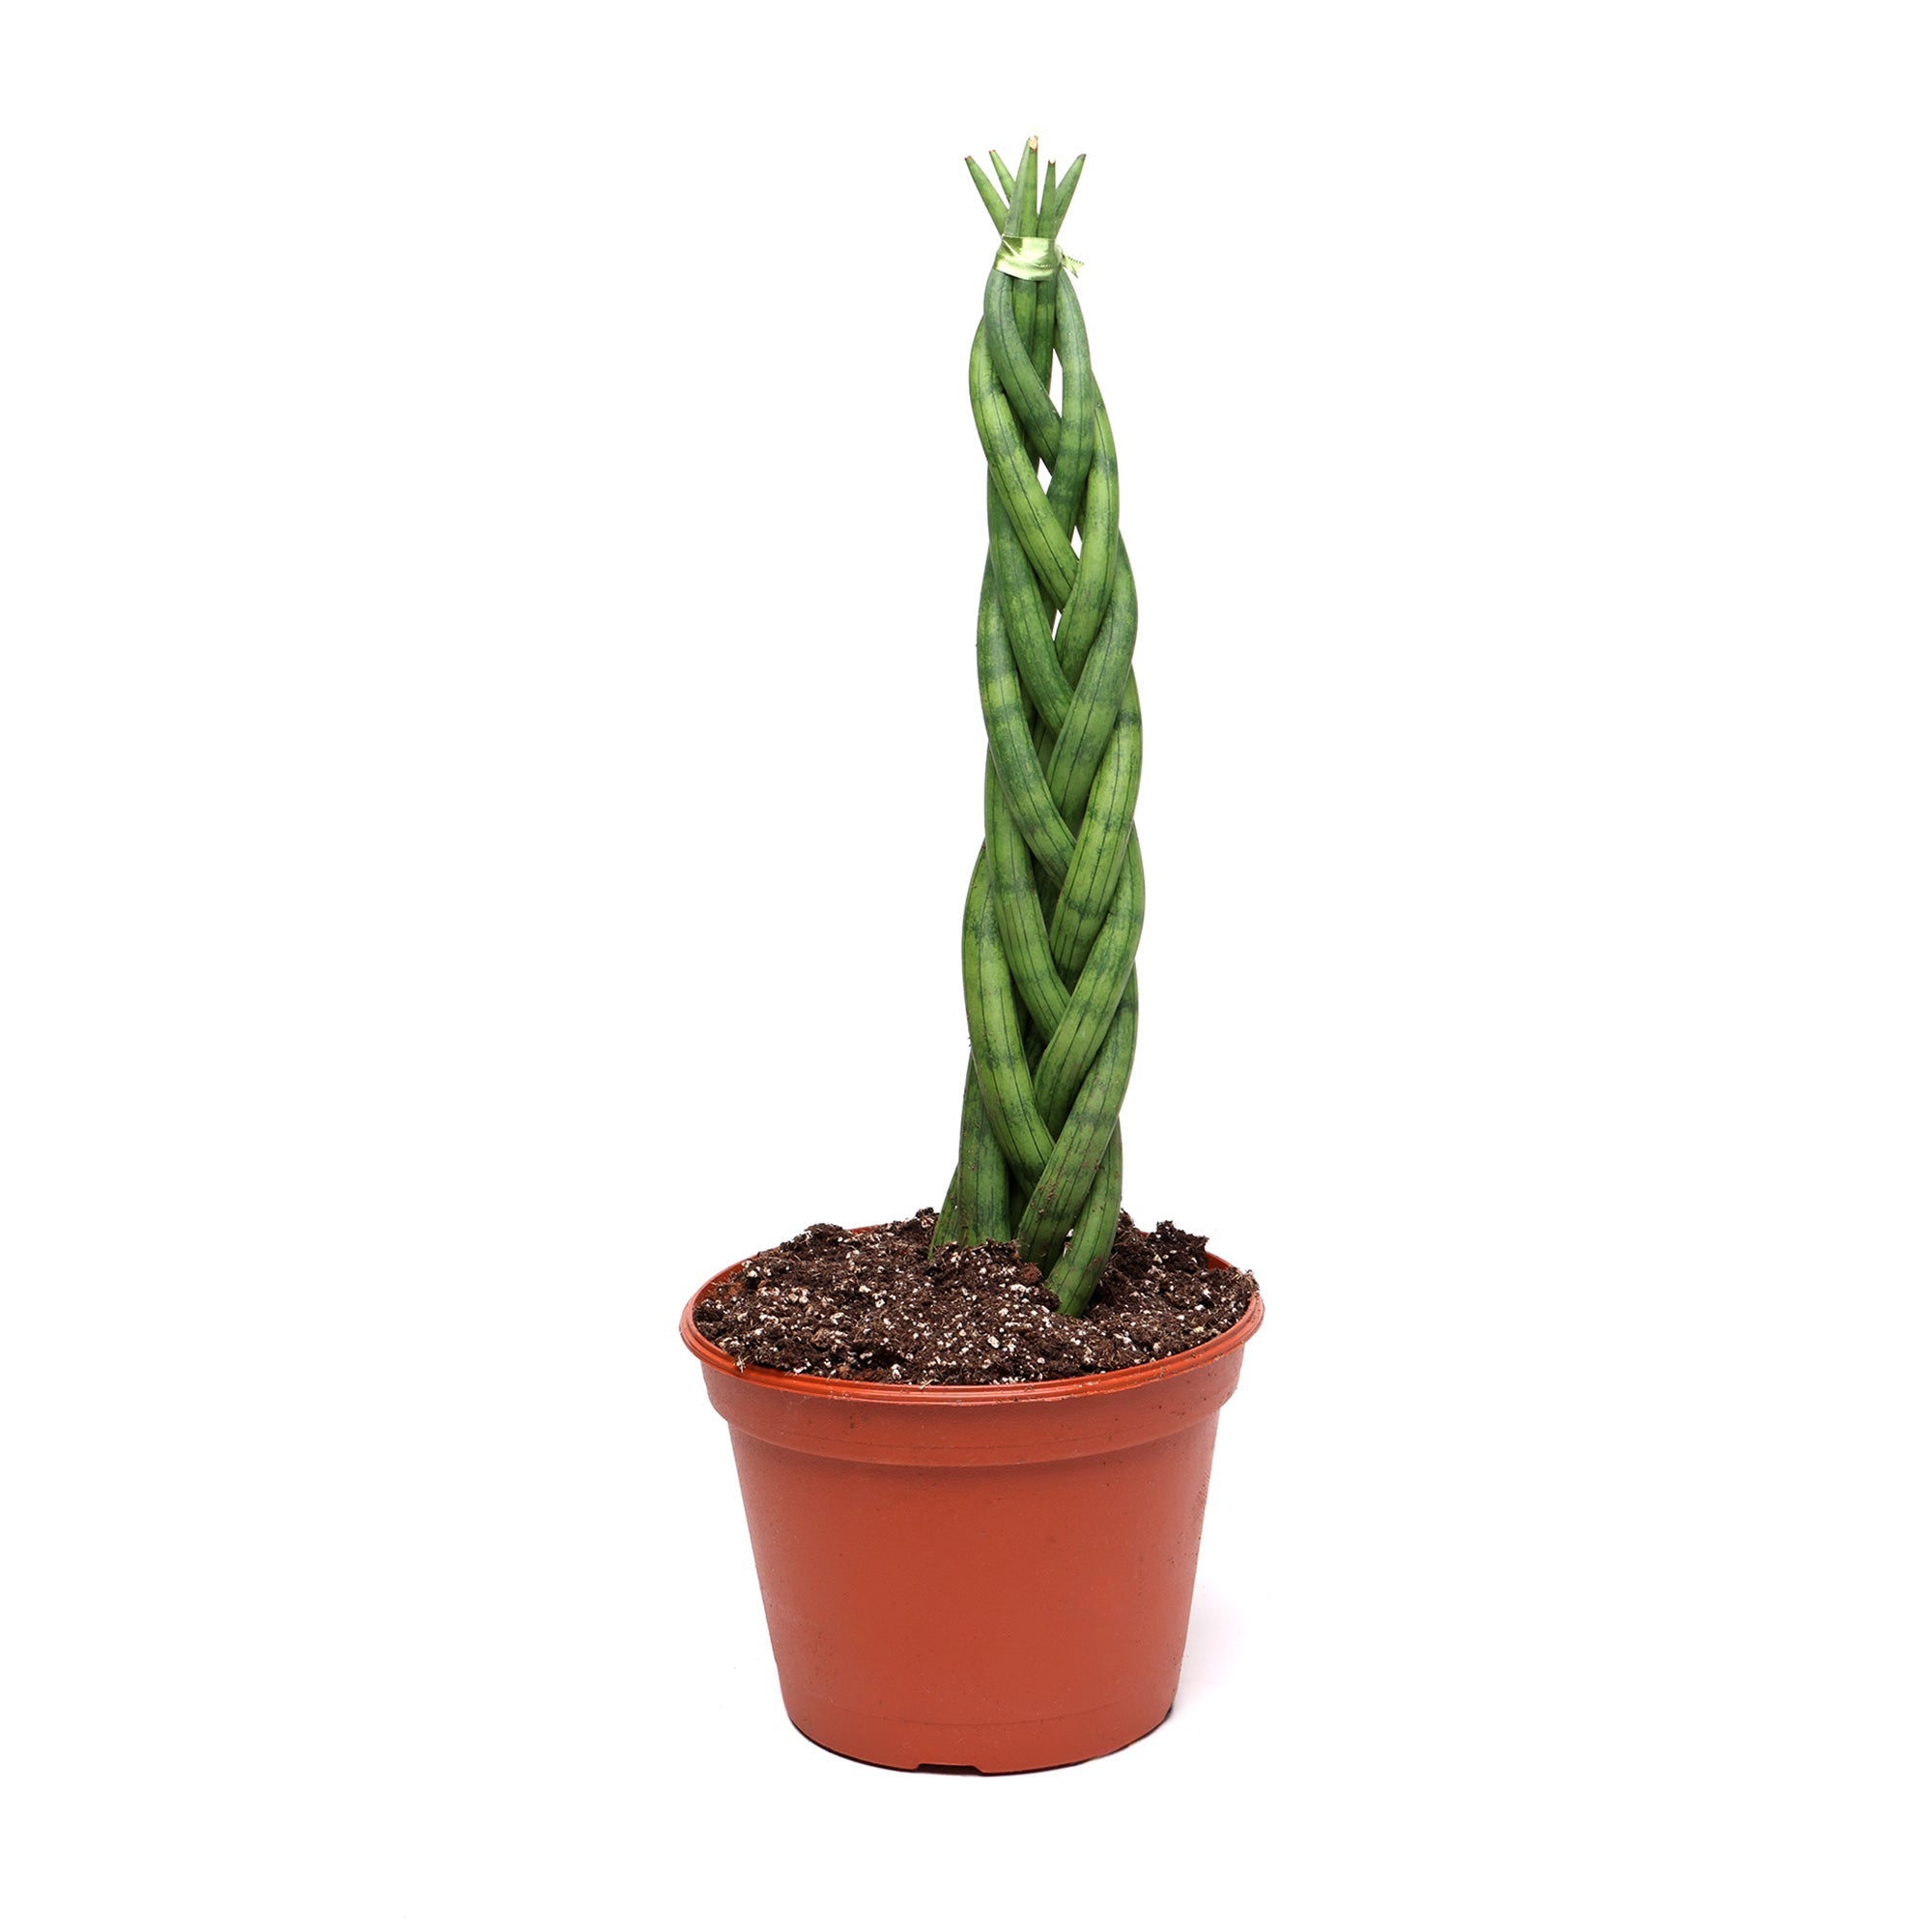 A Cylindrica Braid 8 Inches plant from Chive Studio standing upright in a terracotta pot, isolated against a white background.